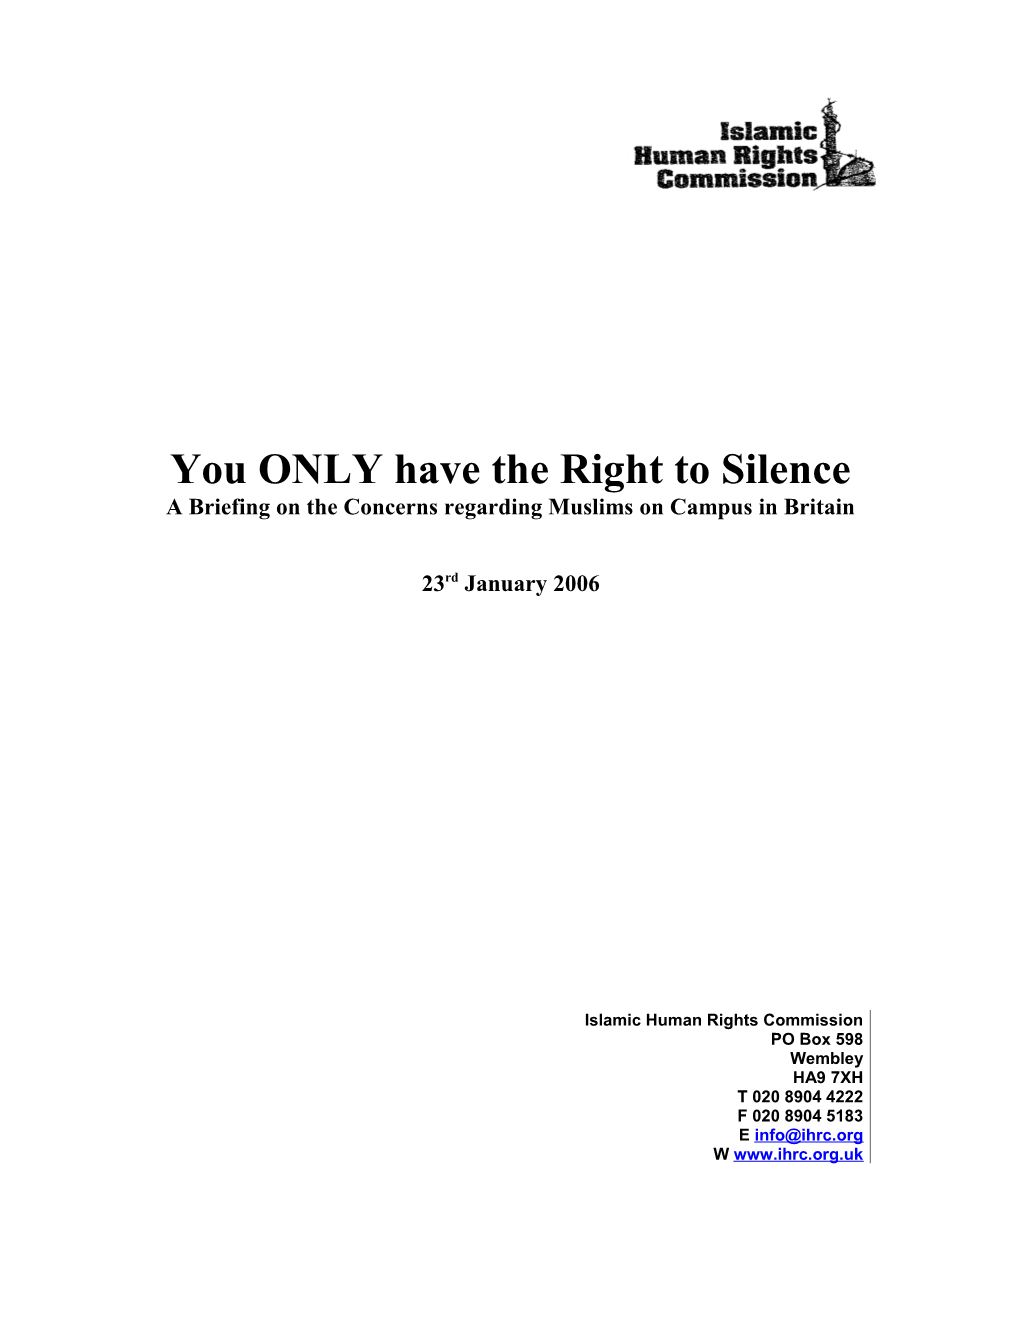 You ONLY Have The Right To Silence